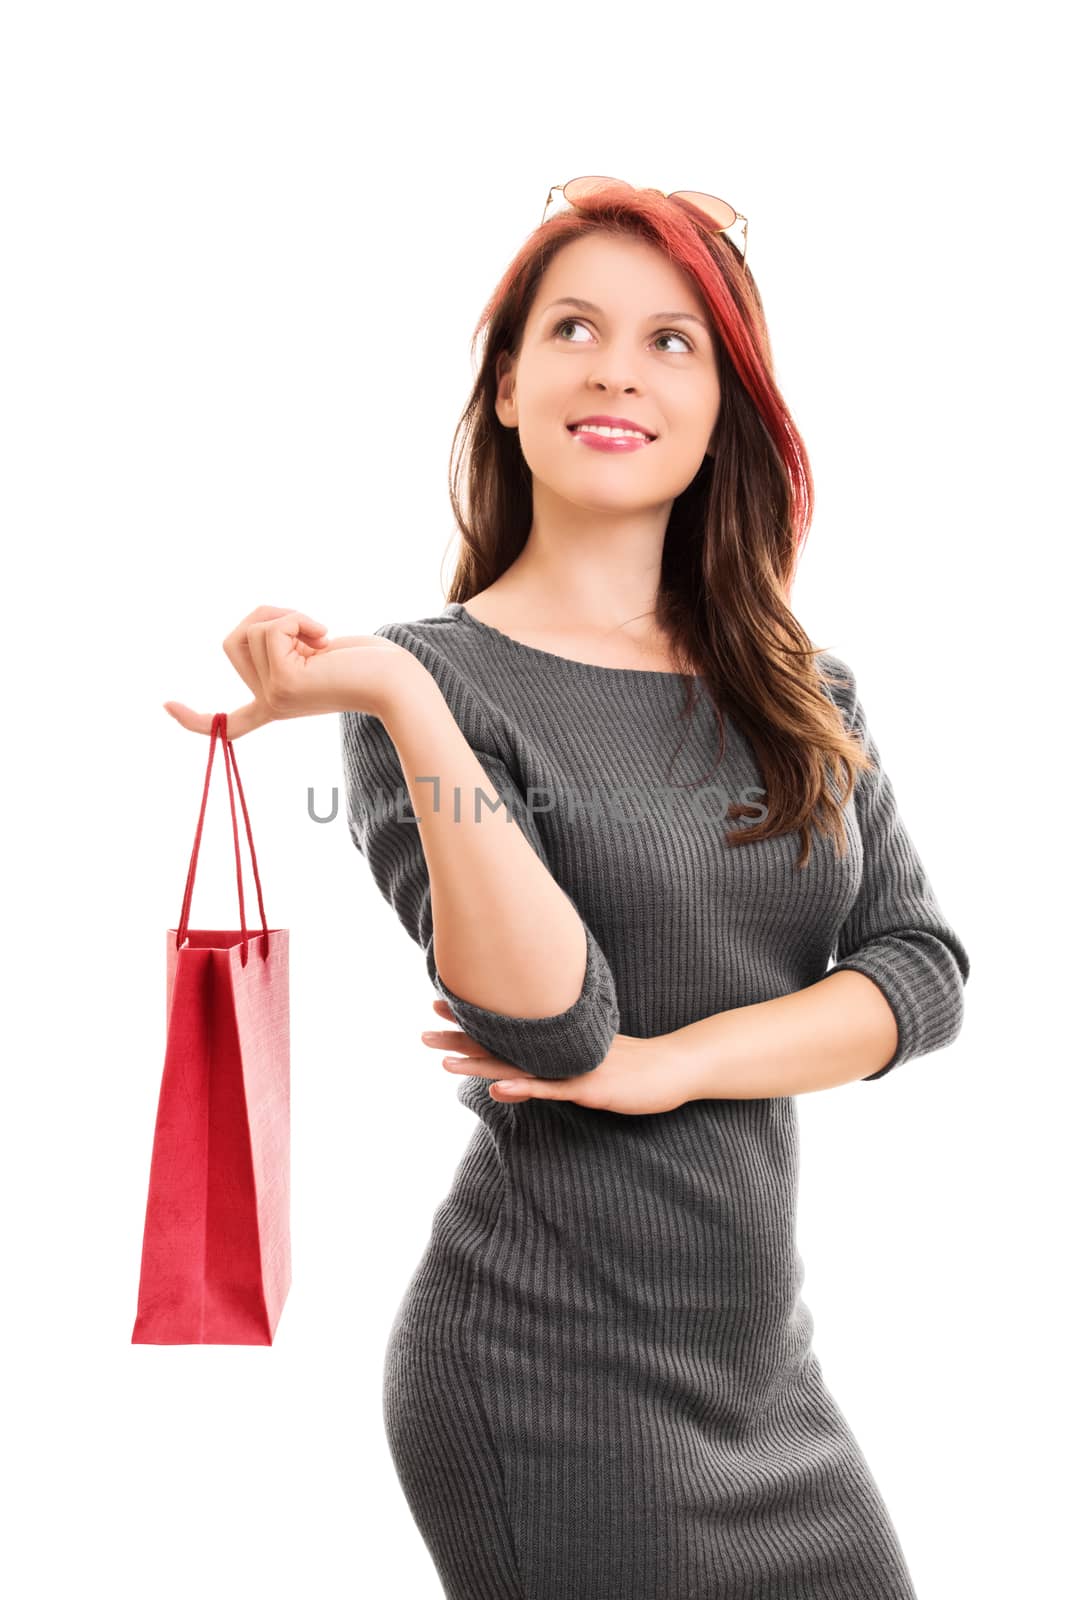 A portrait shot of a beautiful young girl in a dress, holding a shopping bag, isolated on white background.